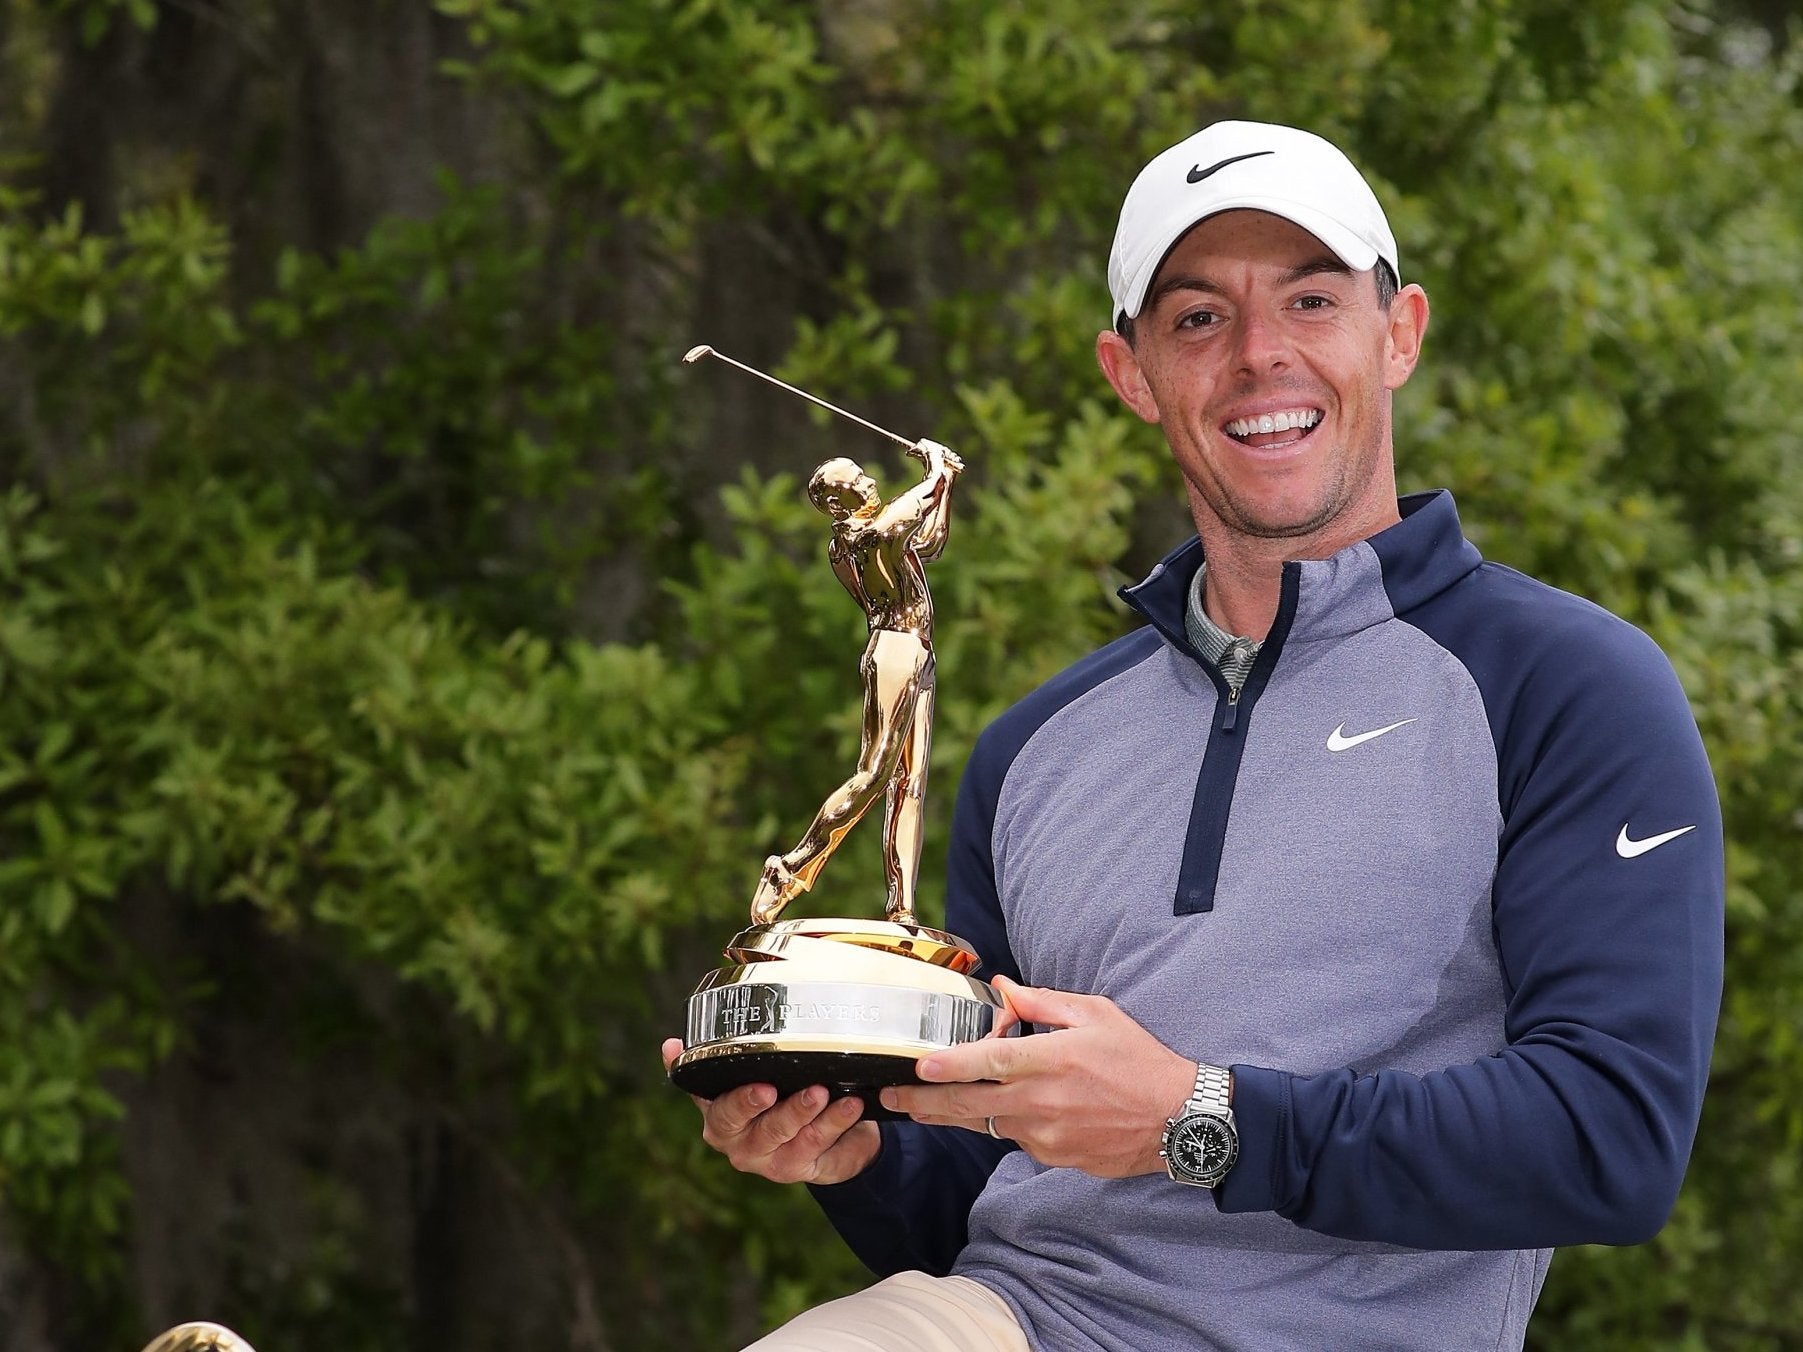 McIlroy ended his trophy dought at The Players championship